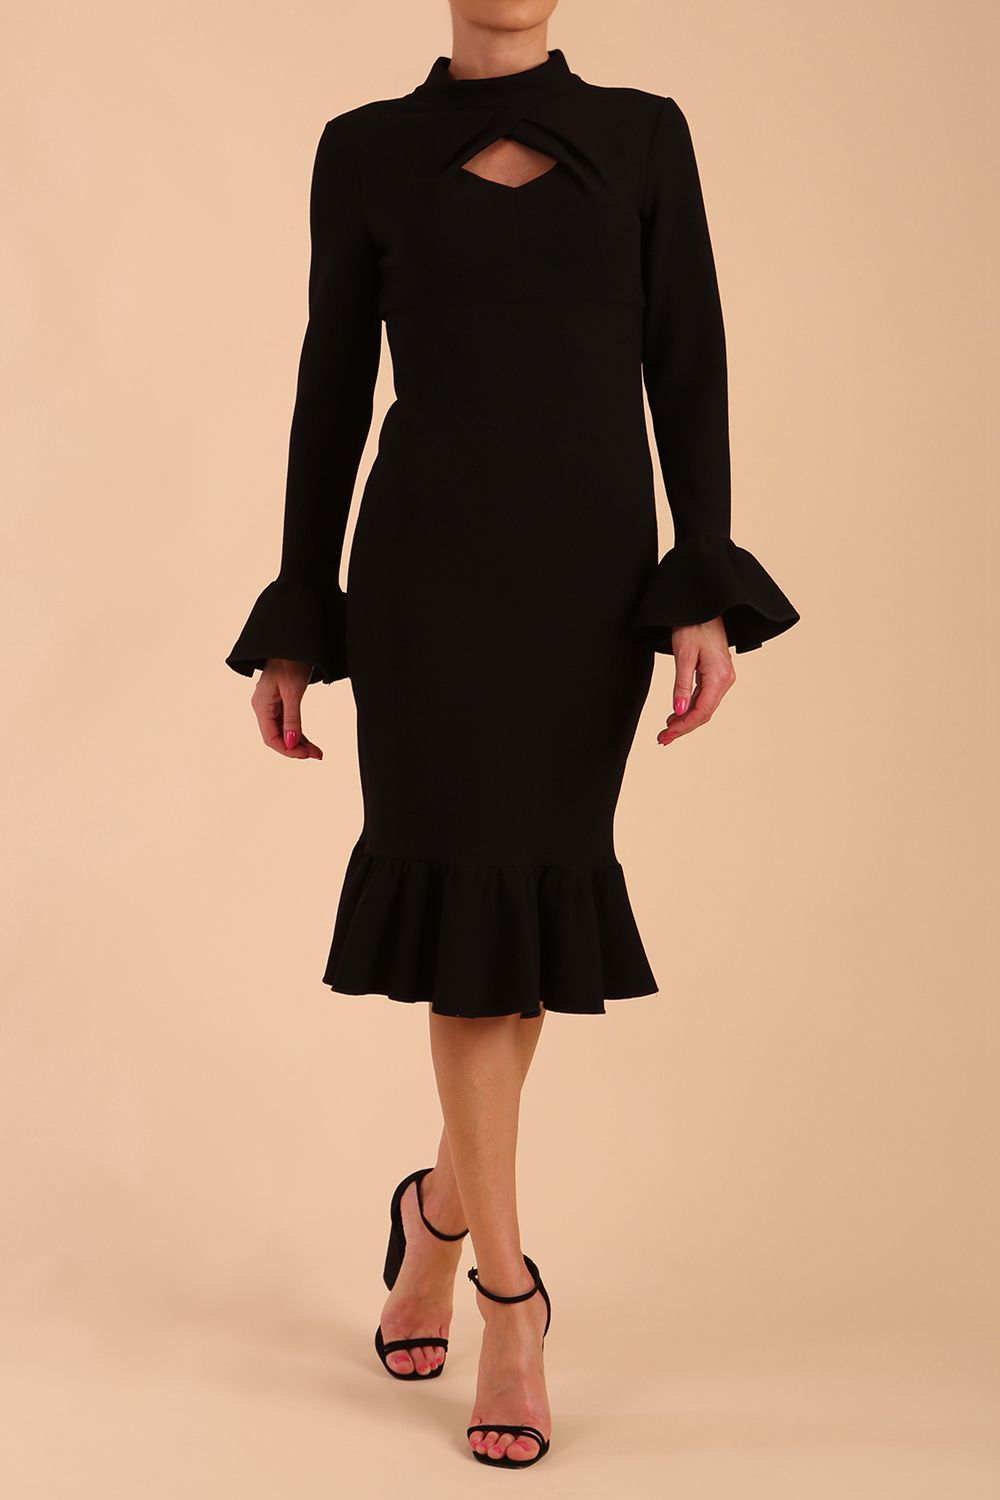 Model wearing Macarena Peplum Hem Bodycon Pencil Dress with Long sleeves with peplum details at the ends and High neckline with overlapping keyhole detail in Black colour front